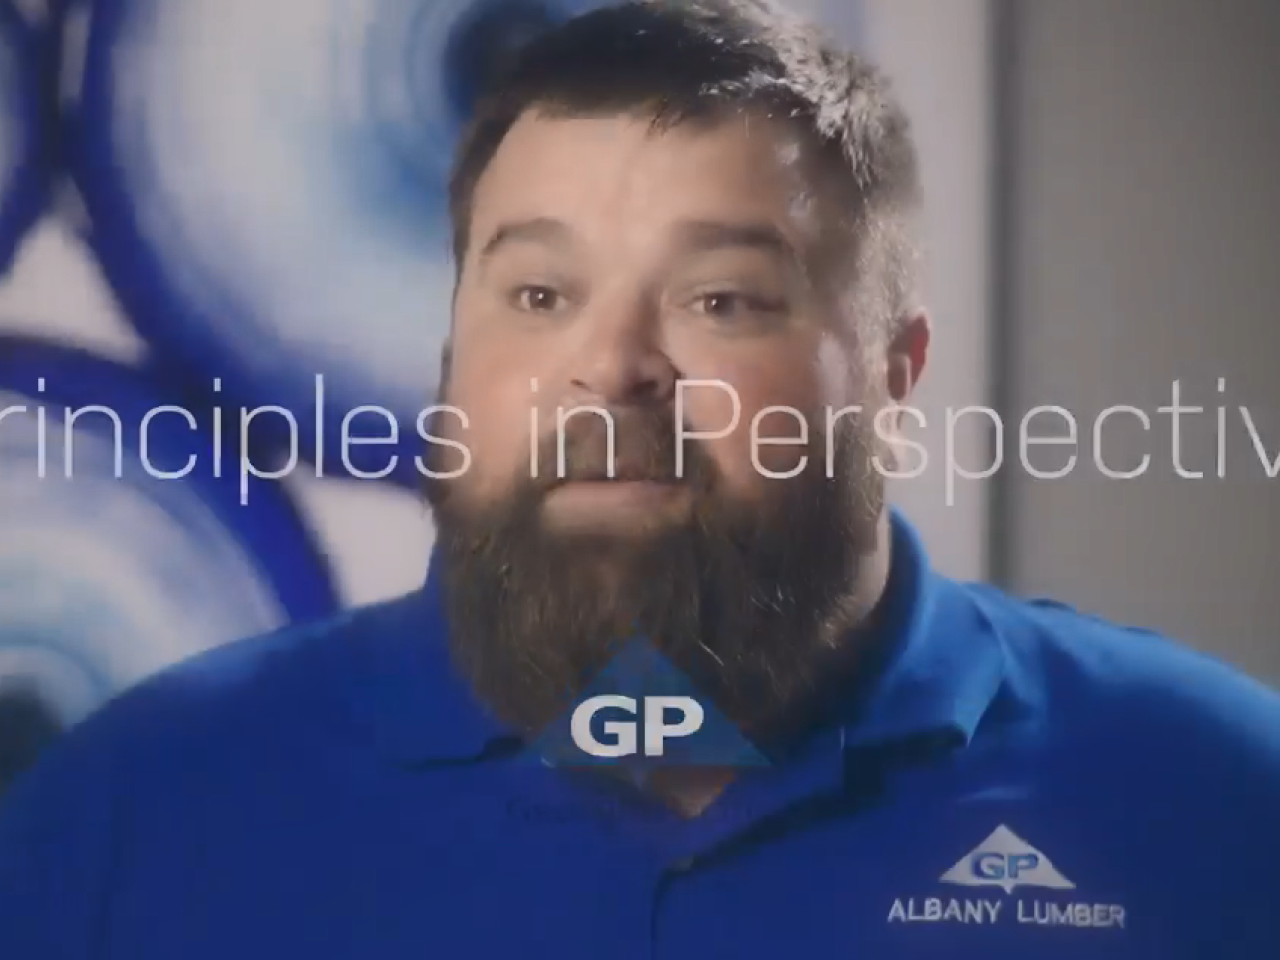 Jesse Ingram. "Principles in Perspective" and GP logo on top.